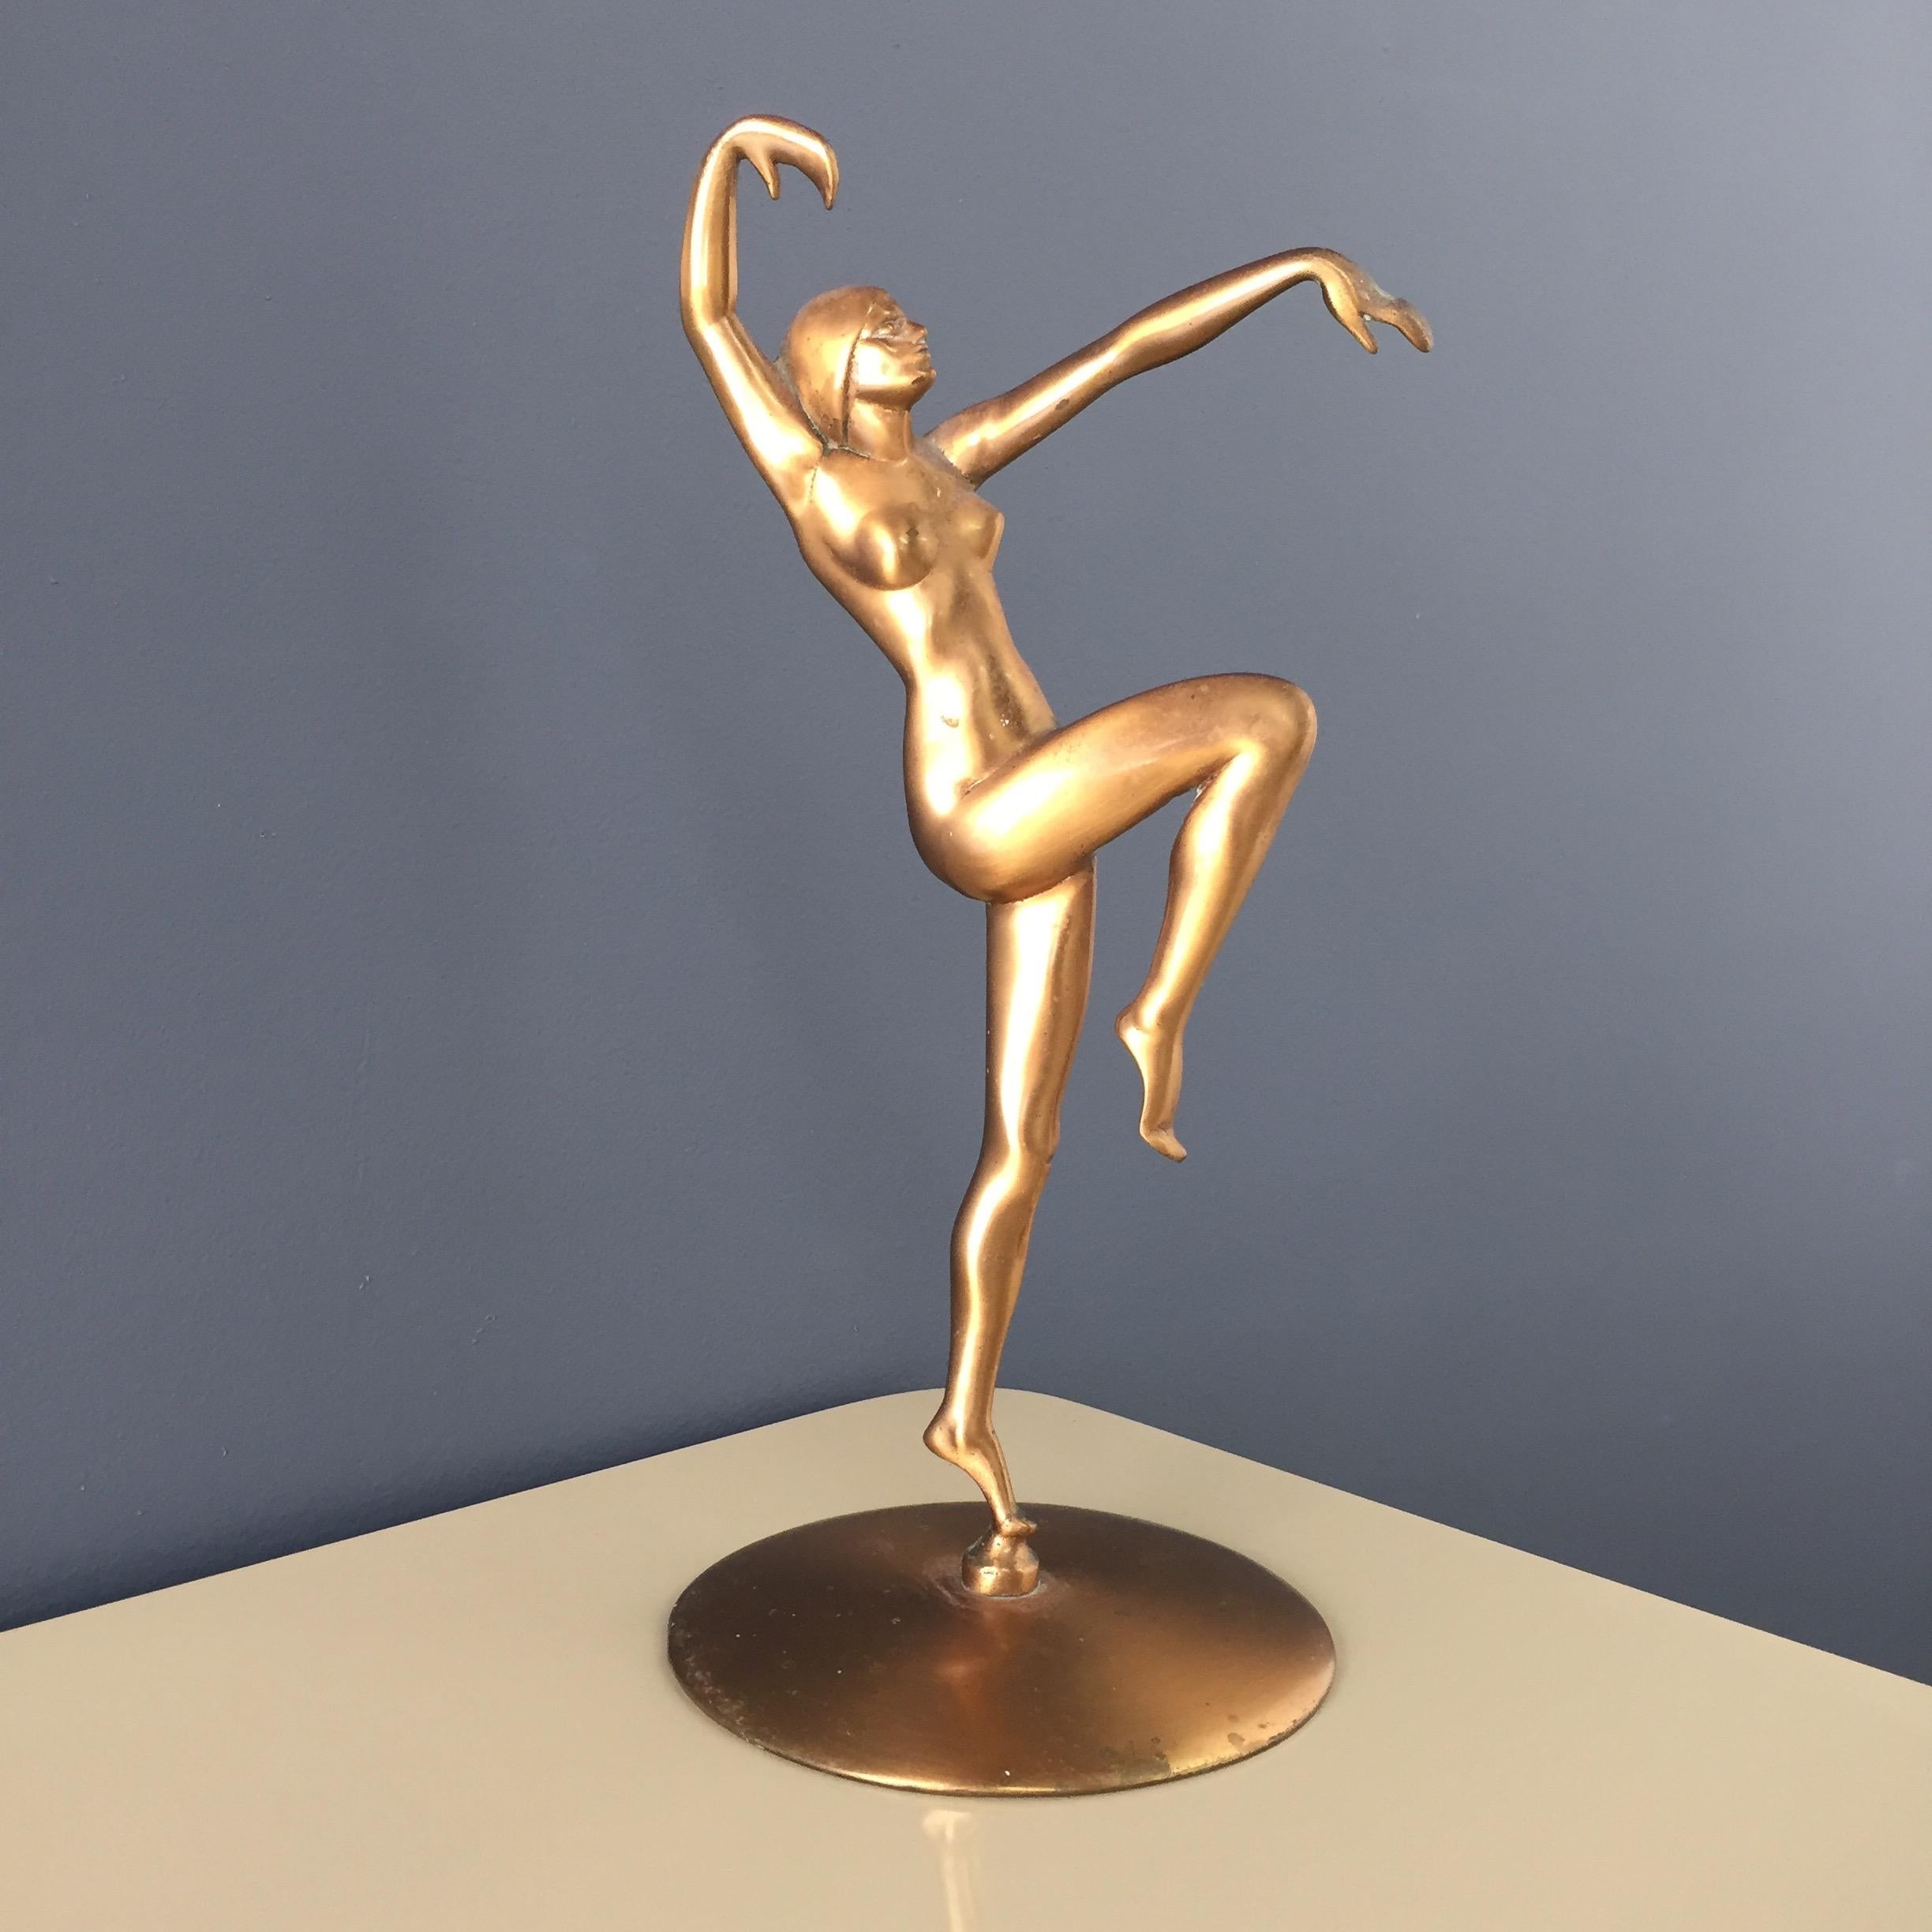 This listing is for a Classic and striking Art Deco copper sculpture depicting a dancing nude by Henri Lautier who was a French Sculpture. The sculpture stands at approx 12.25 inches tall, 6